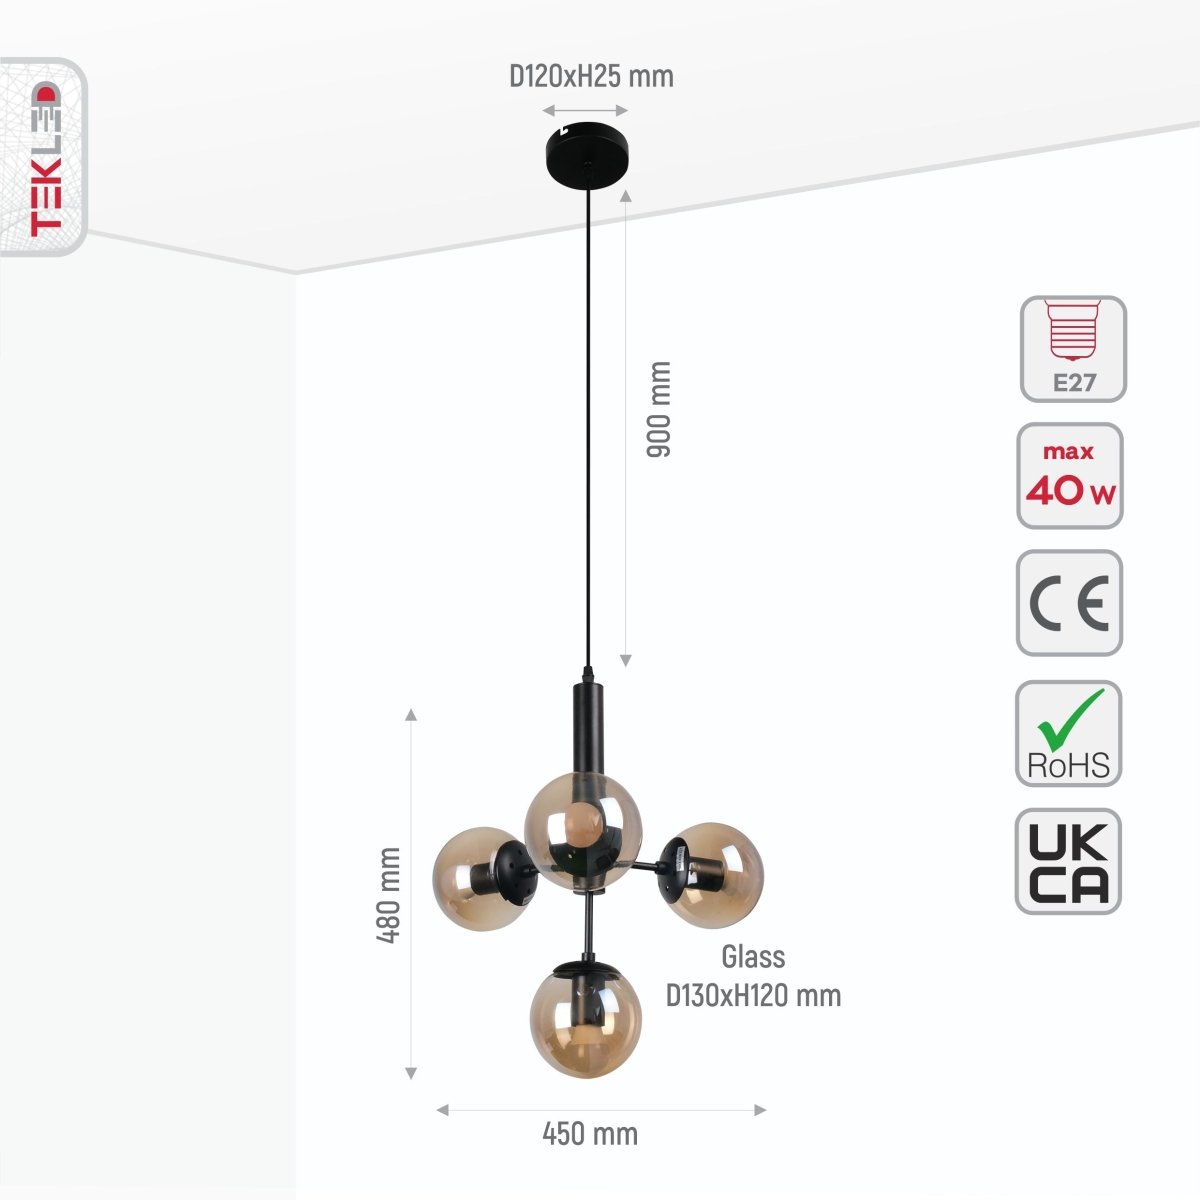 Size and specs of Atom Model Amber Globe Glass Black Metal Body Chandelier with 4xE27 Fittings | TEKLED 159-17406